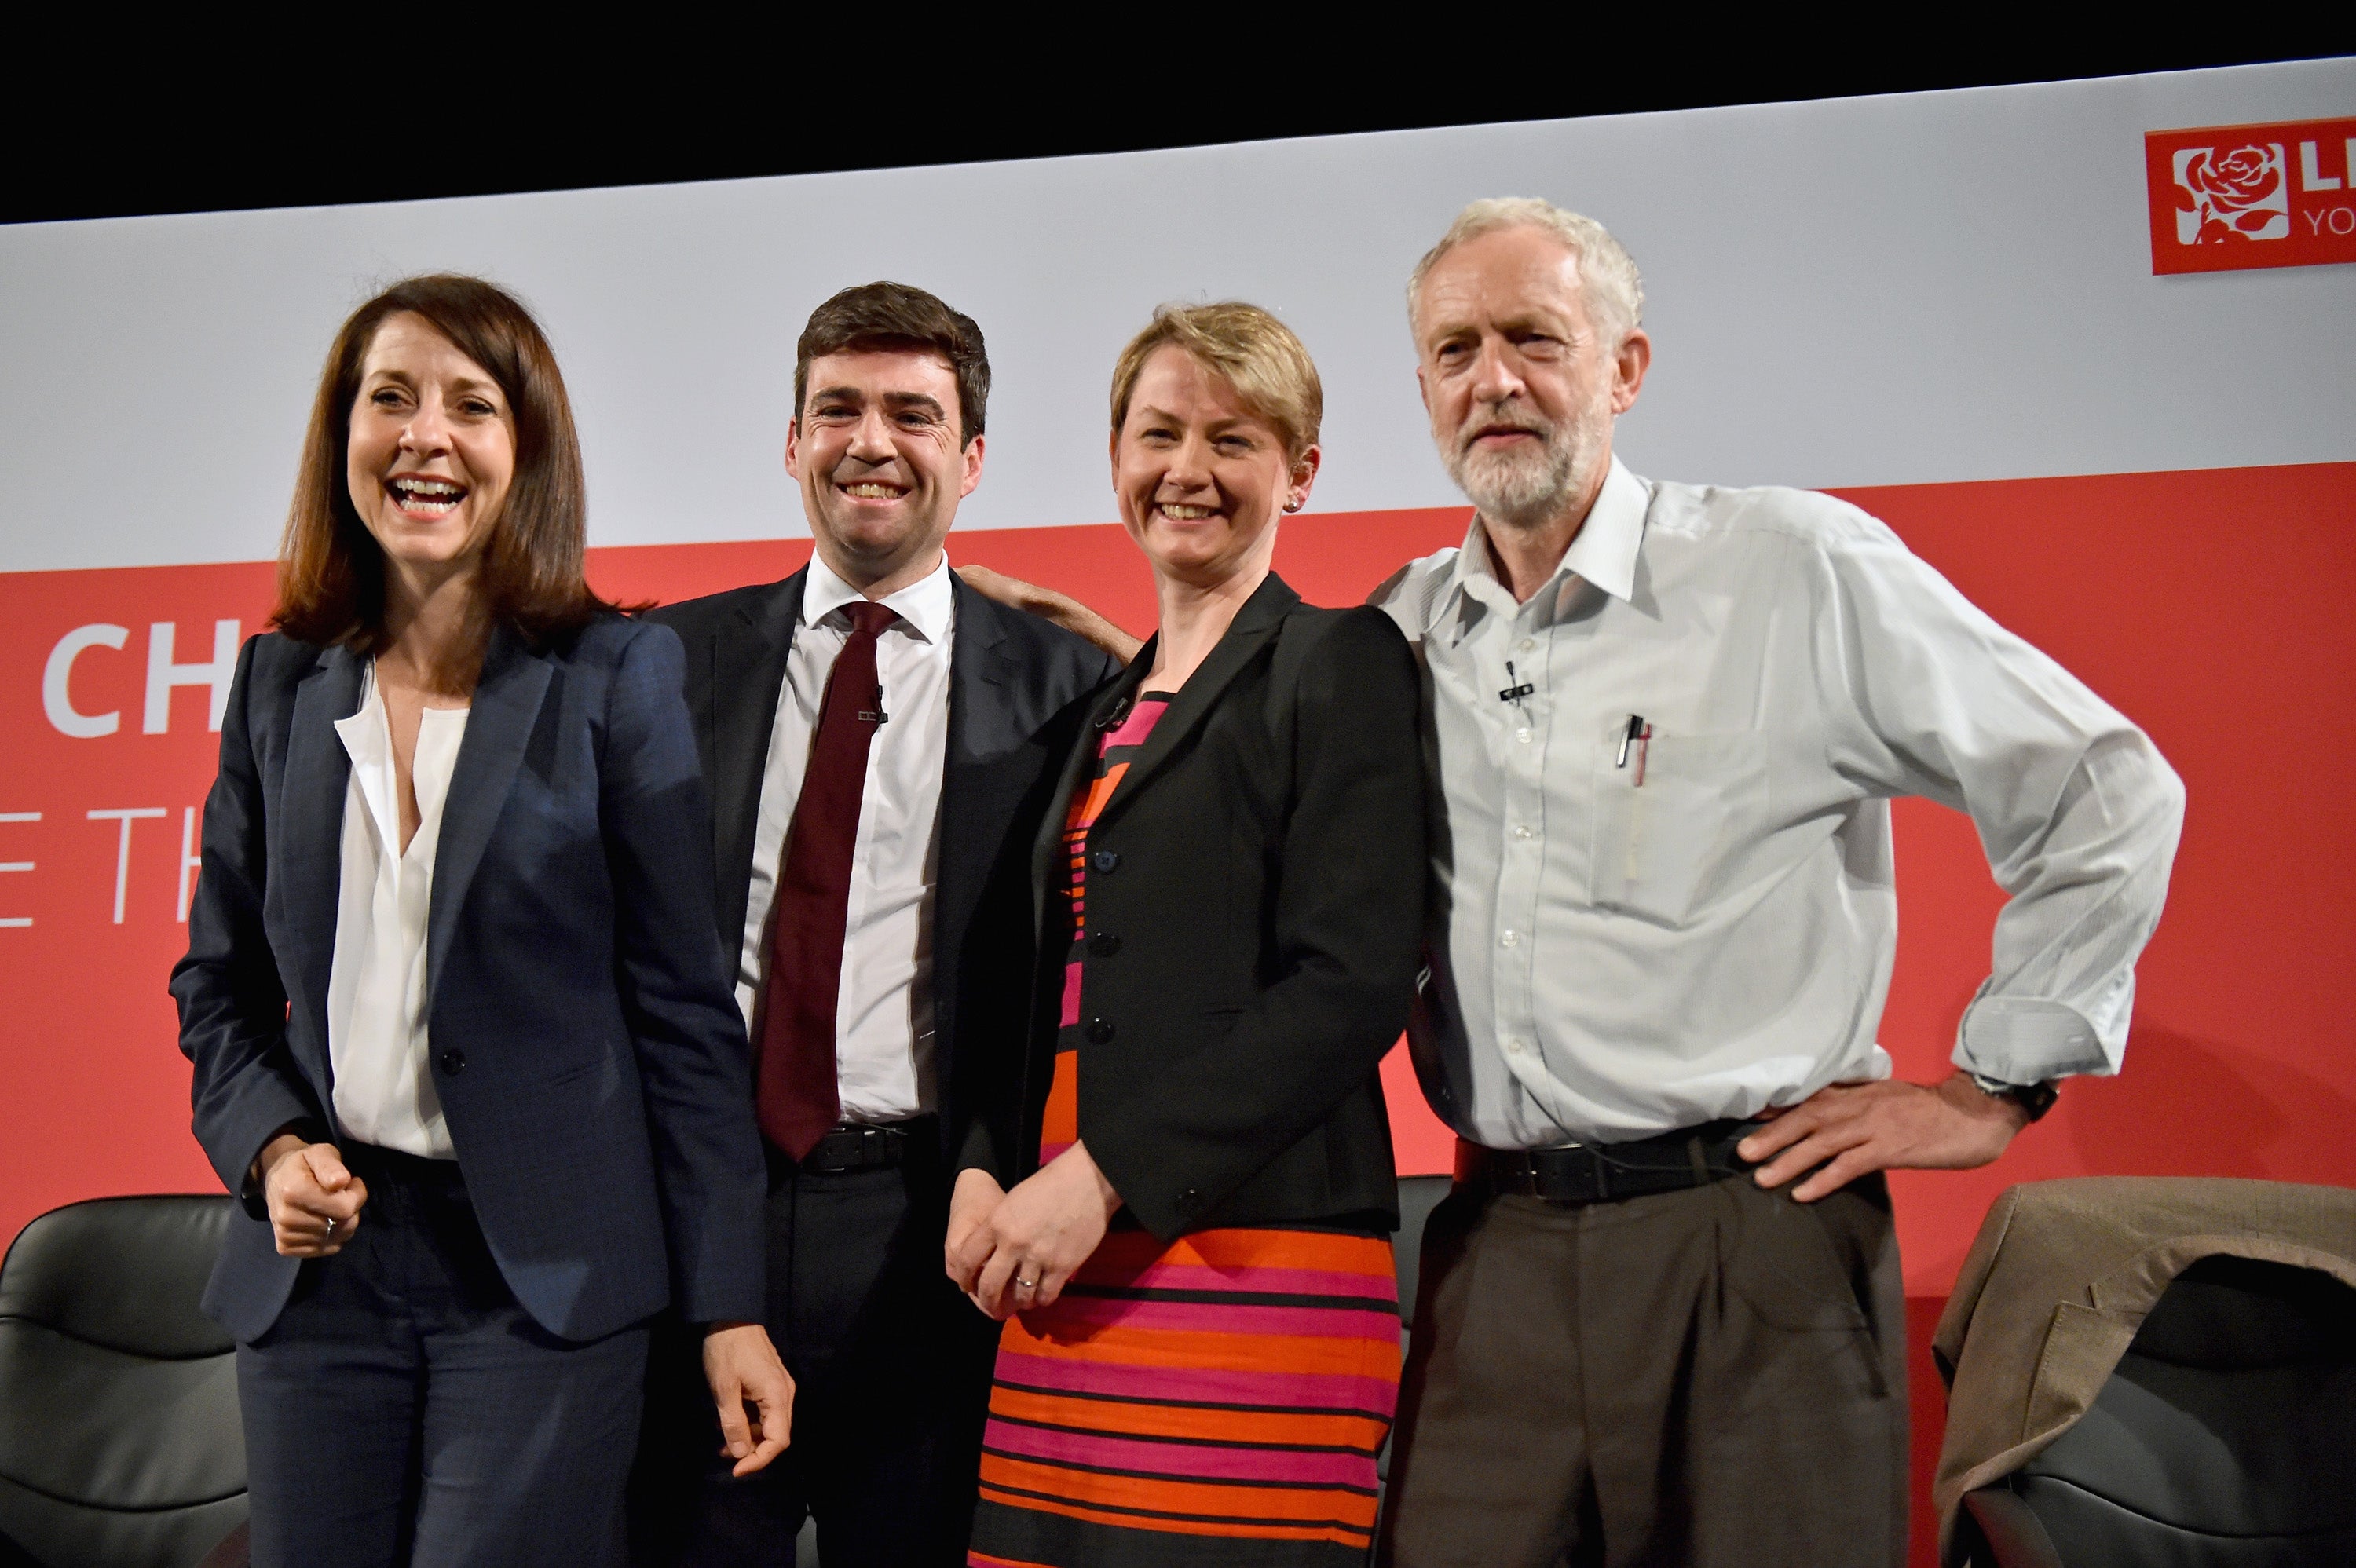 Burnham is currently up against Liz Kendall, Yvette Cooper and Jeremy Corbyn in the Labour leadership contest